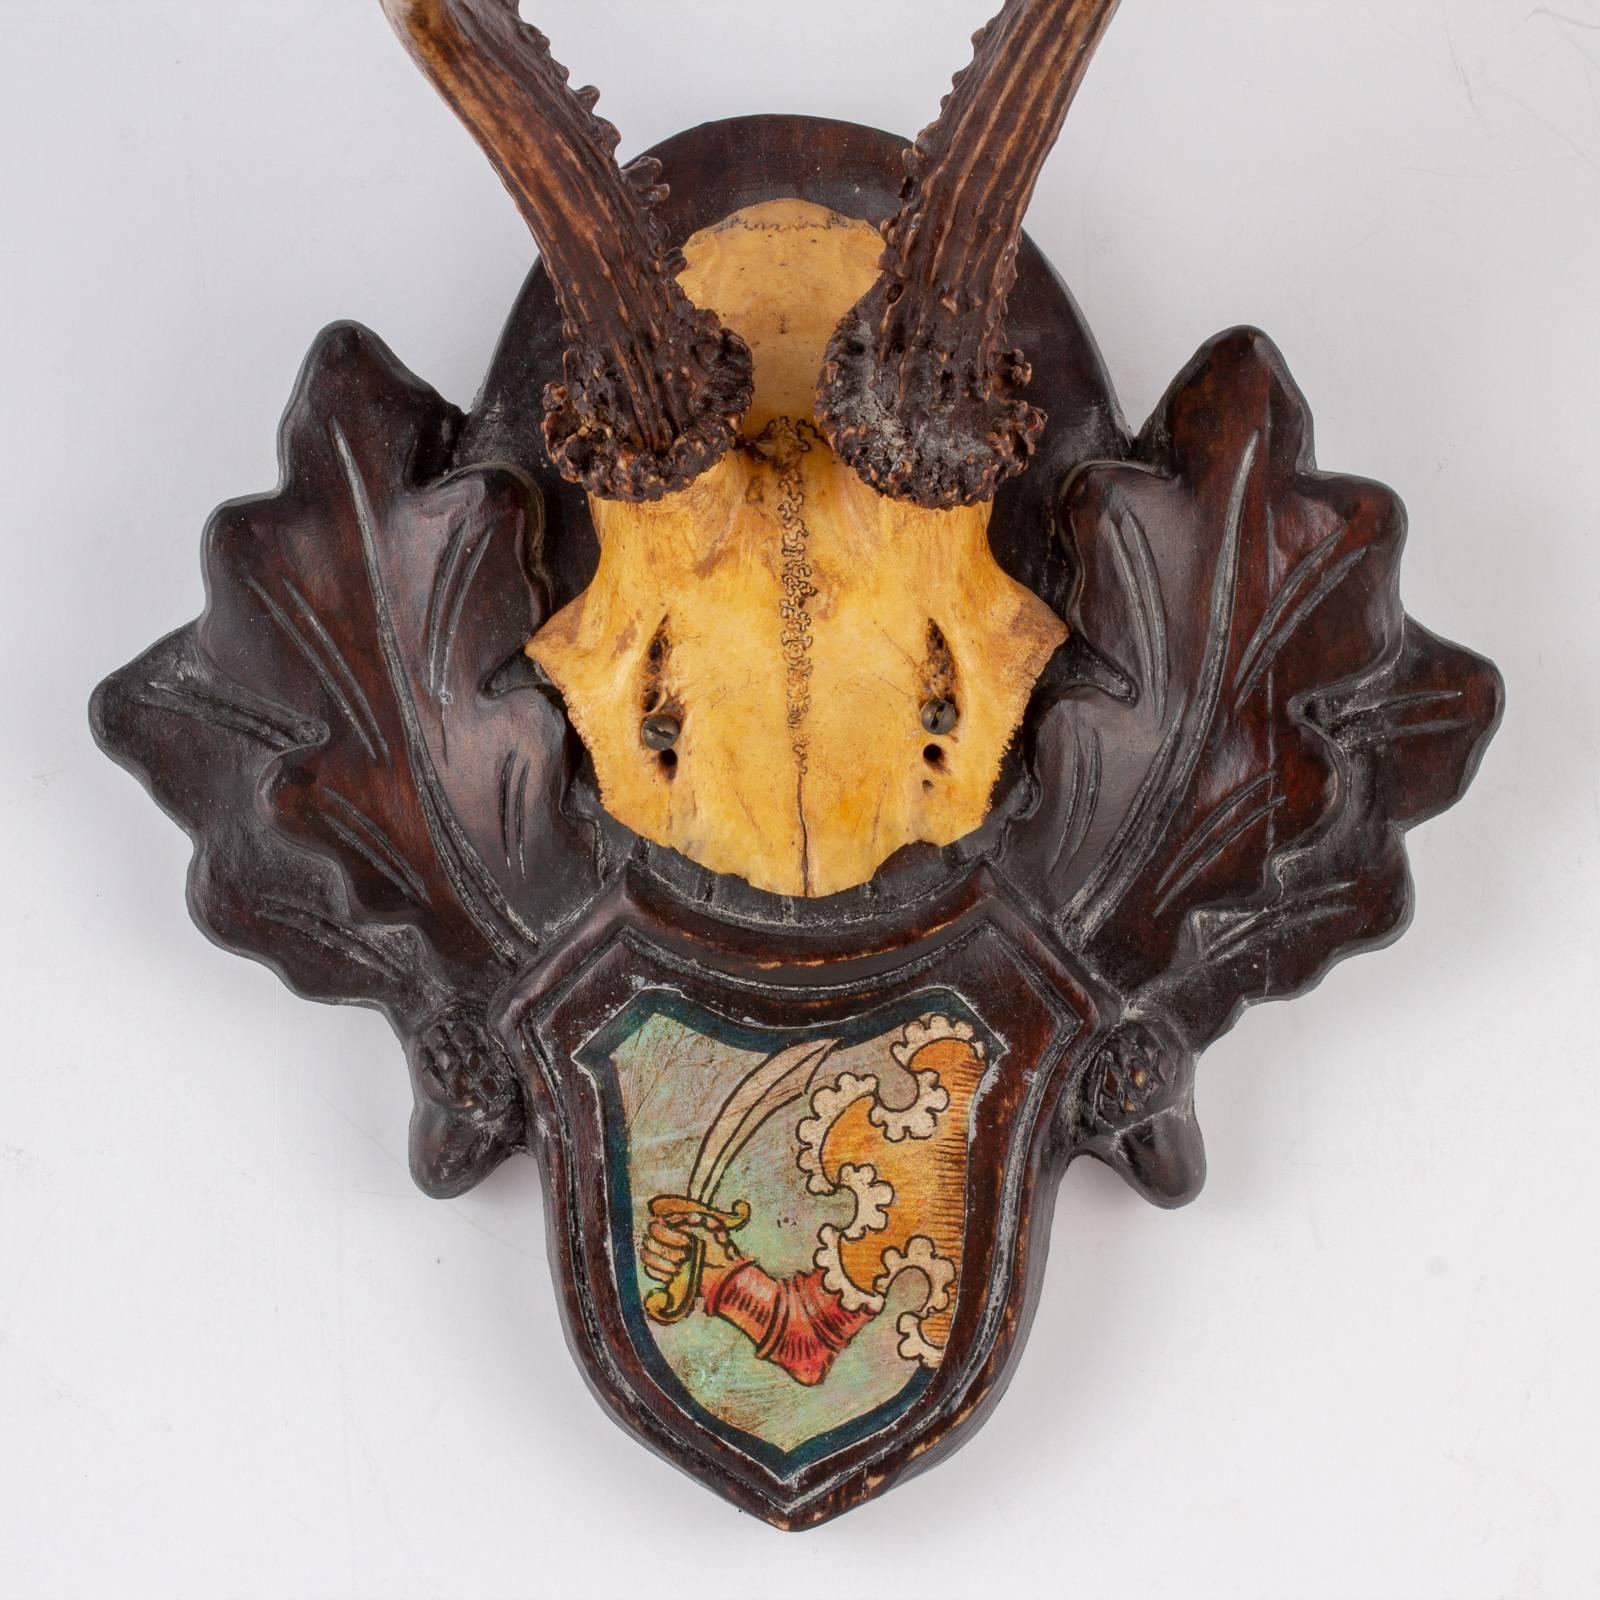 This grouping of hunting trophies originated from the Eckartsau castle of Emperor Franz Josef in the Southern Austrian Alps. Eckartsau was a favorite hunting schloss of the Habsburg family. The Heraldic badge appears to be a crest of a noble